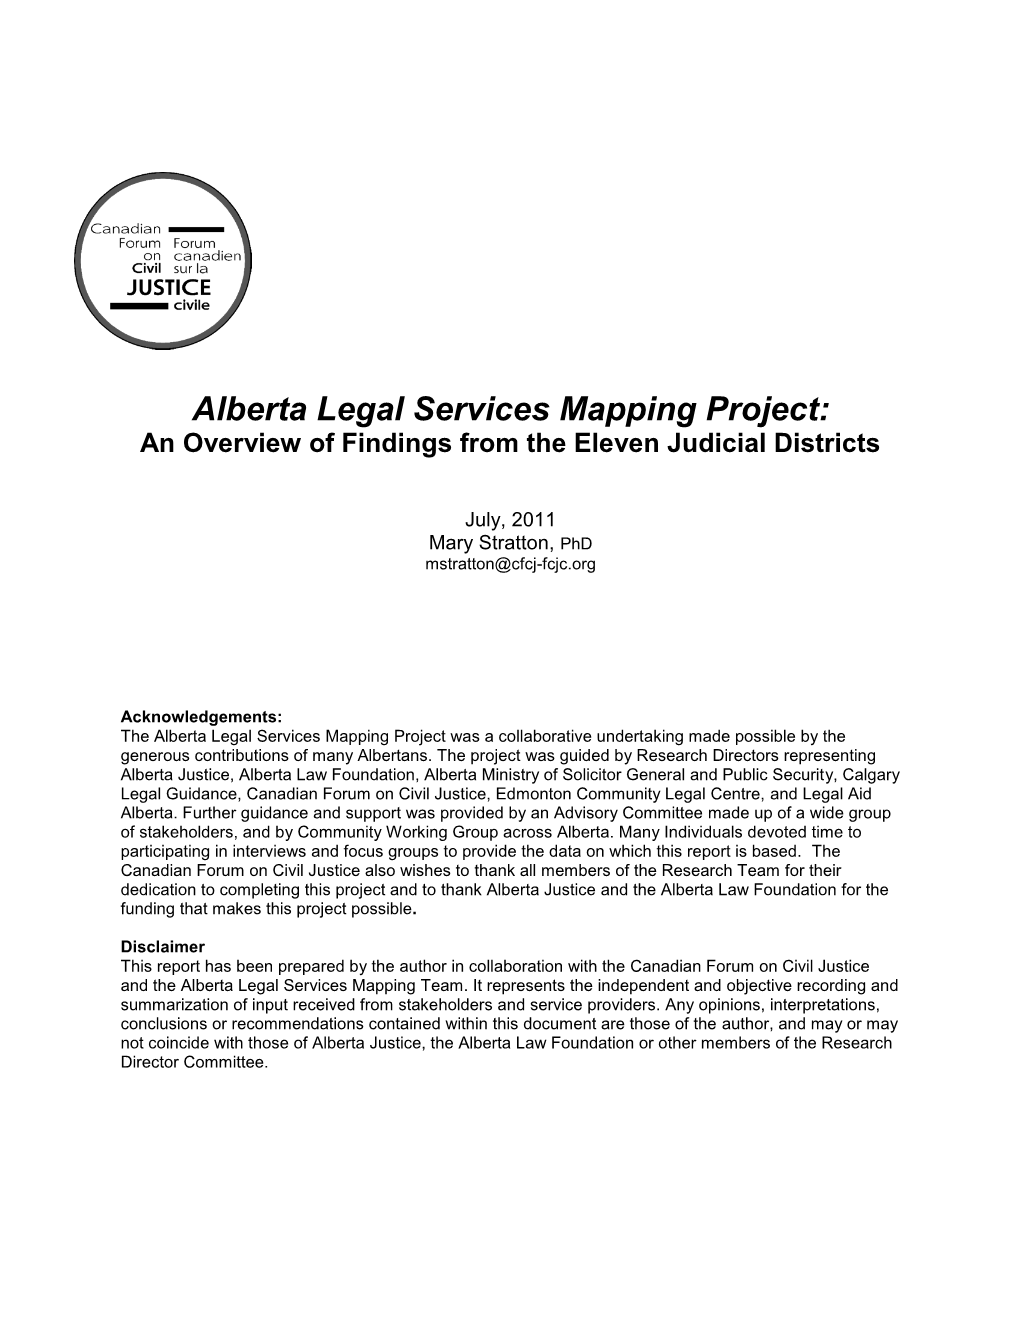 Alberta Legal Services Mapping Project: an Overview of Findings from the Eleven Judicial Districts